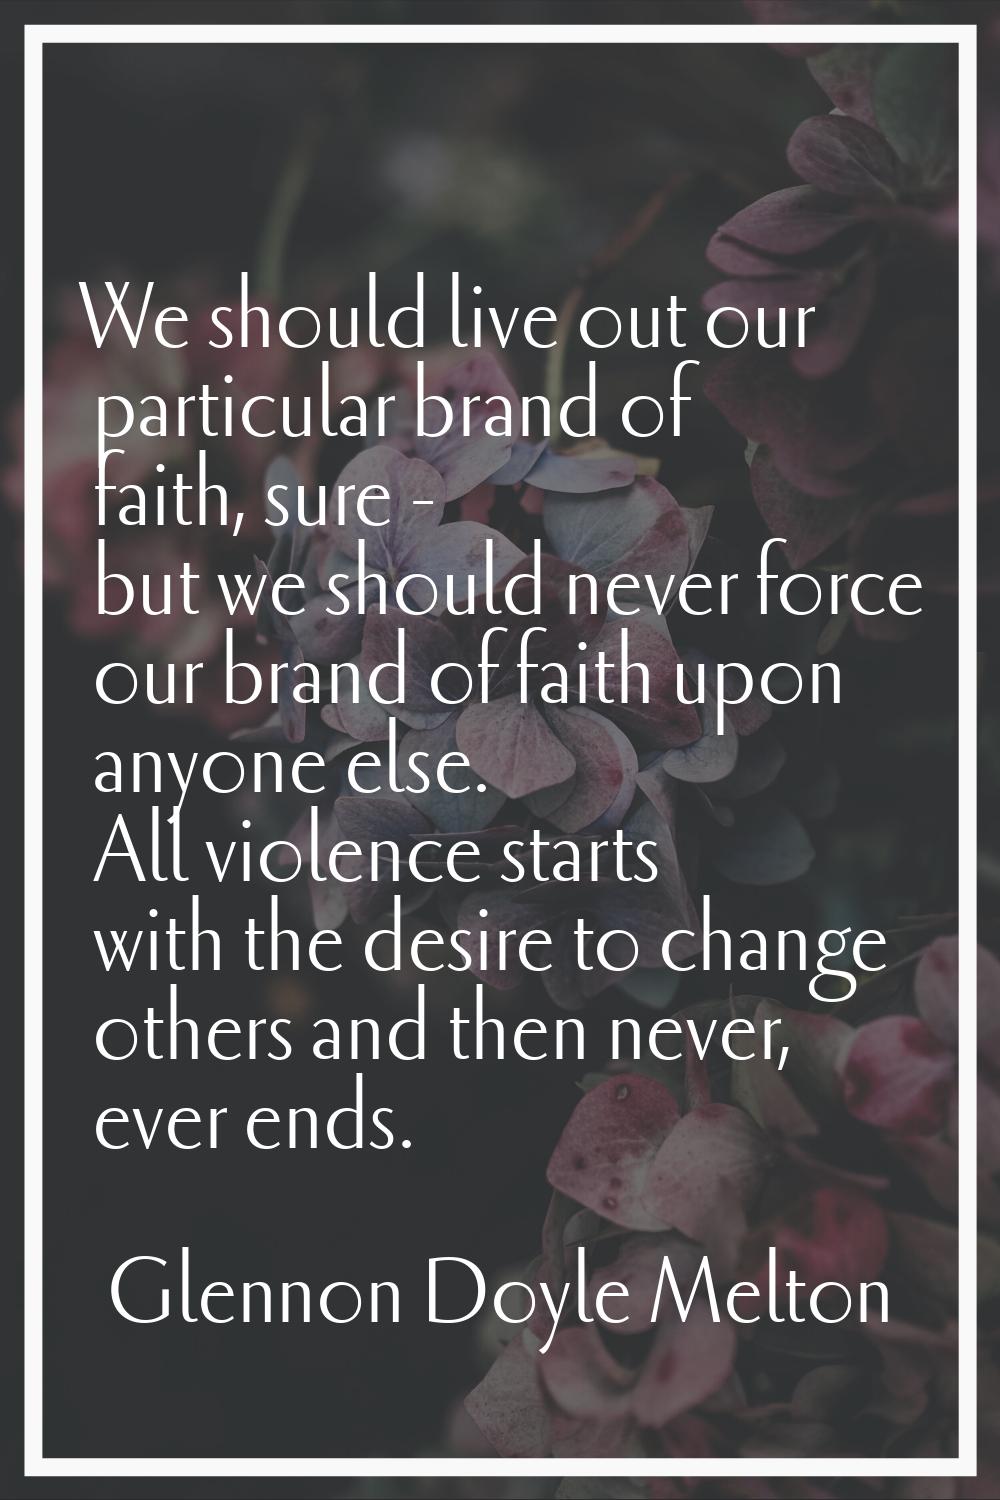 We should live out our particular brand of faith, sure - but we should never force our brand of fai